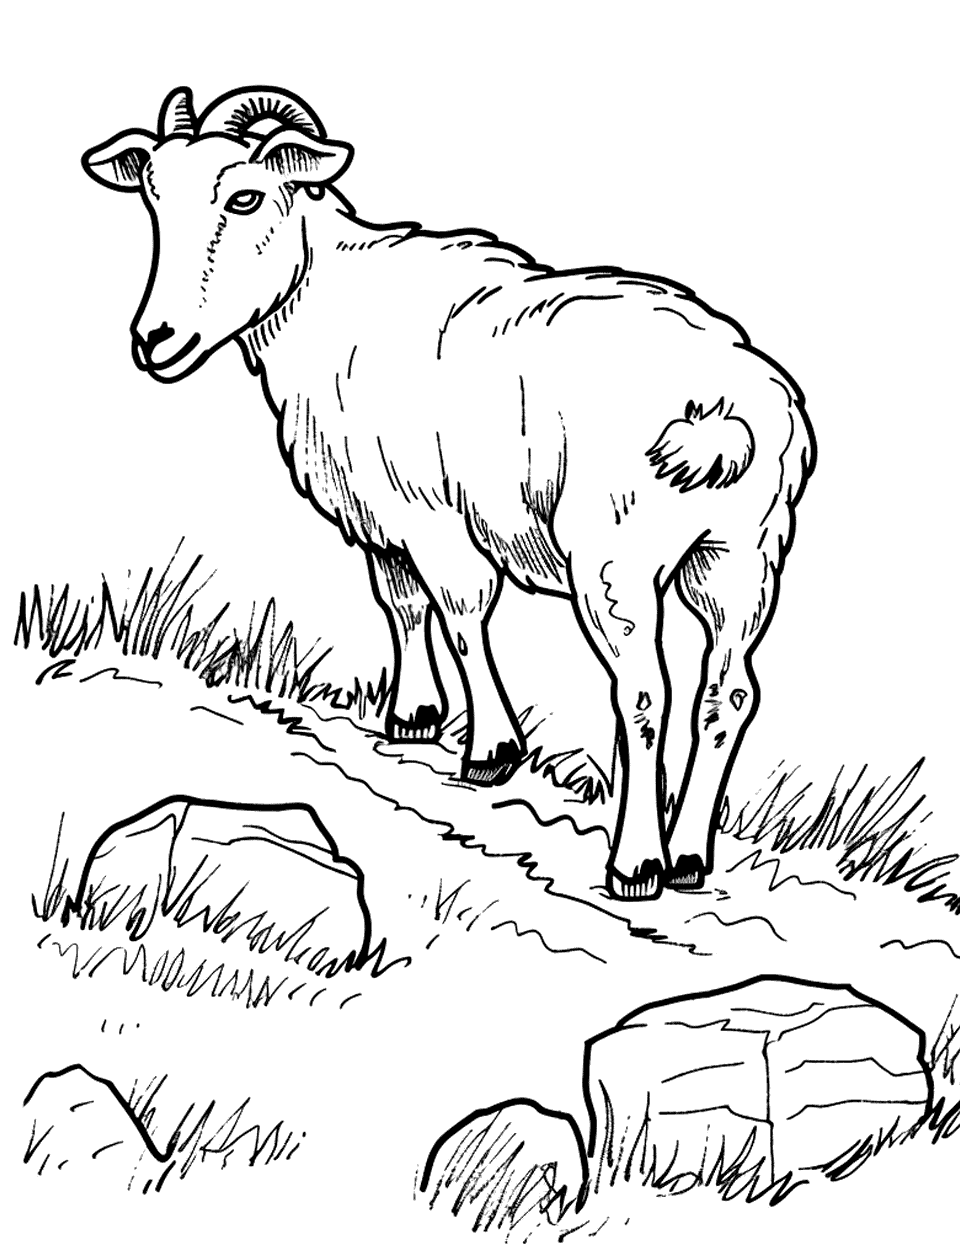 Goat Climbing a Small Hill Farm Animal Coloring Page - A spirited goat climbing up a gentle hill with a few rocks and sparse grass.